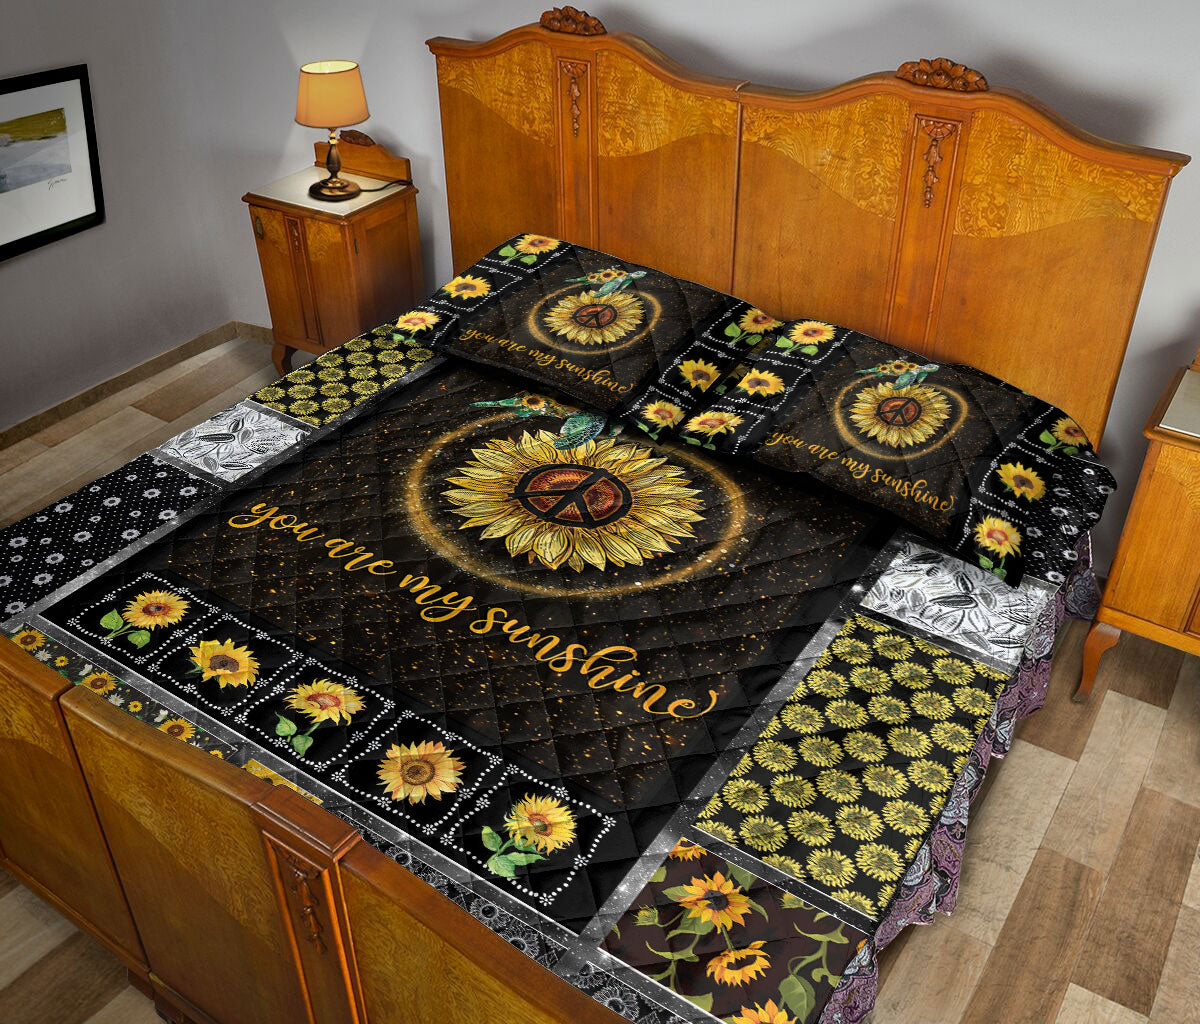 Ohaprints-Quilt-Bed-Set-Pillowcase-Turtle-You-Are-My-Sunshine-Sunflower-Floral-Patchwork-Pattern-Blanket-Bedspread-Bedding-64-Queen (80'' x 90'')